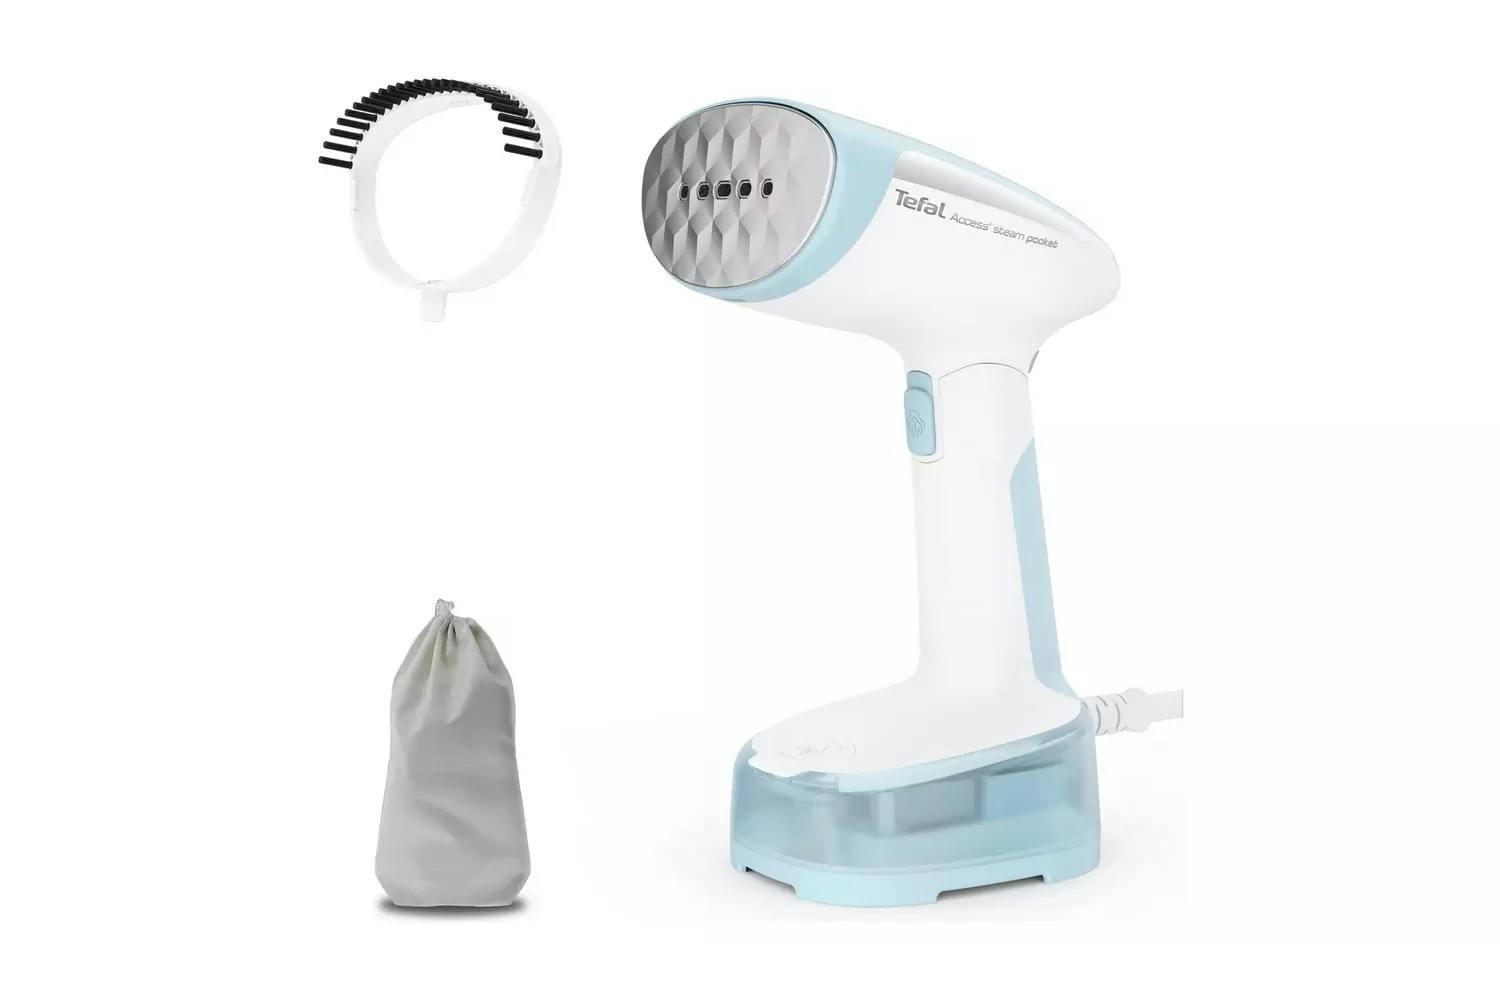 Tefal 1300W Access Steam Pocket Handheld Clothes Steamer | DT3041G0 | White & Sky Blue